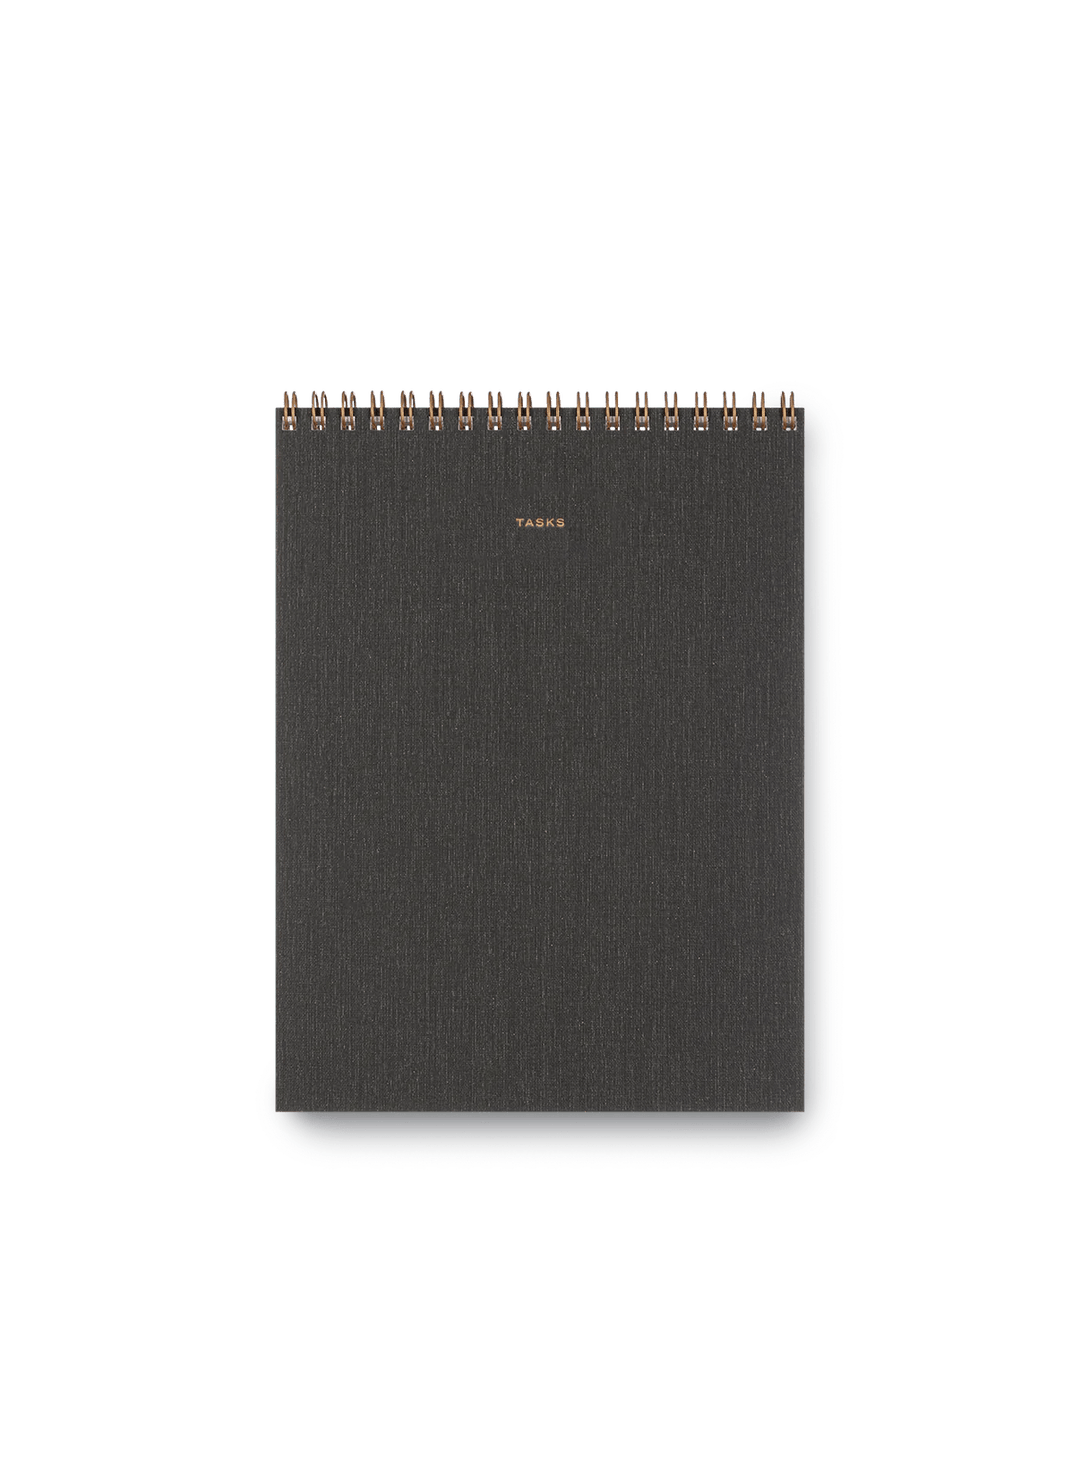 Appointed Notebook Appointed Tasks Notepad - Charcoal Gray